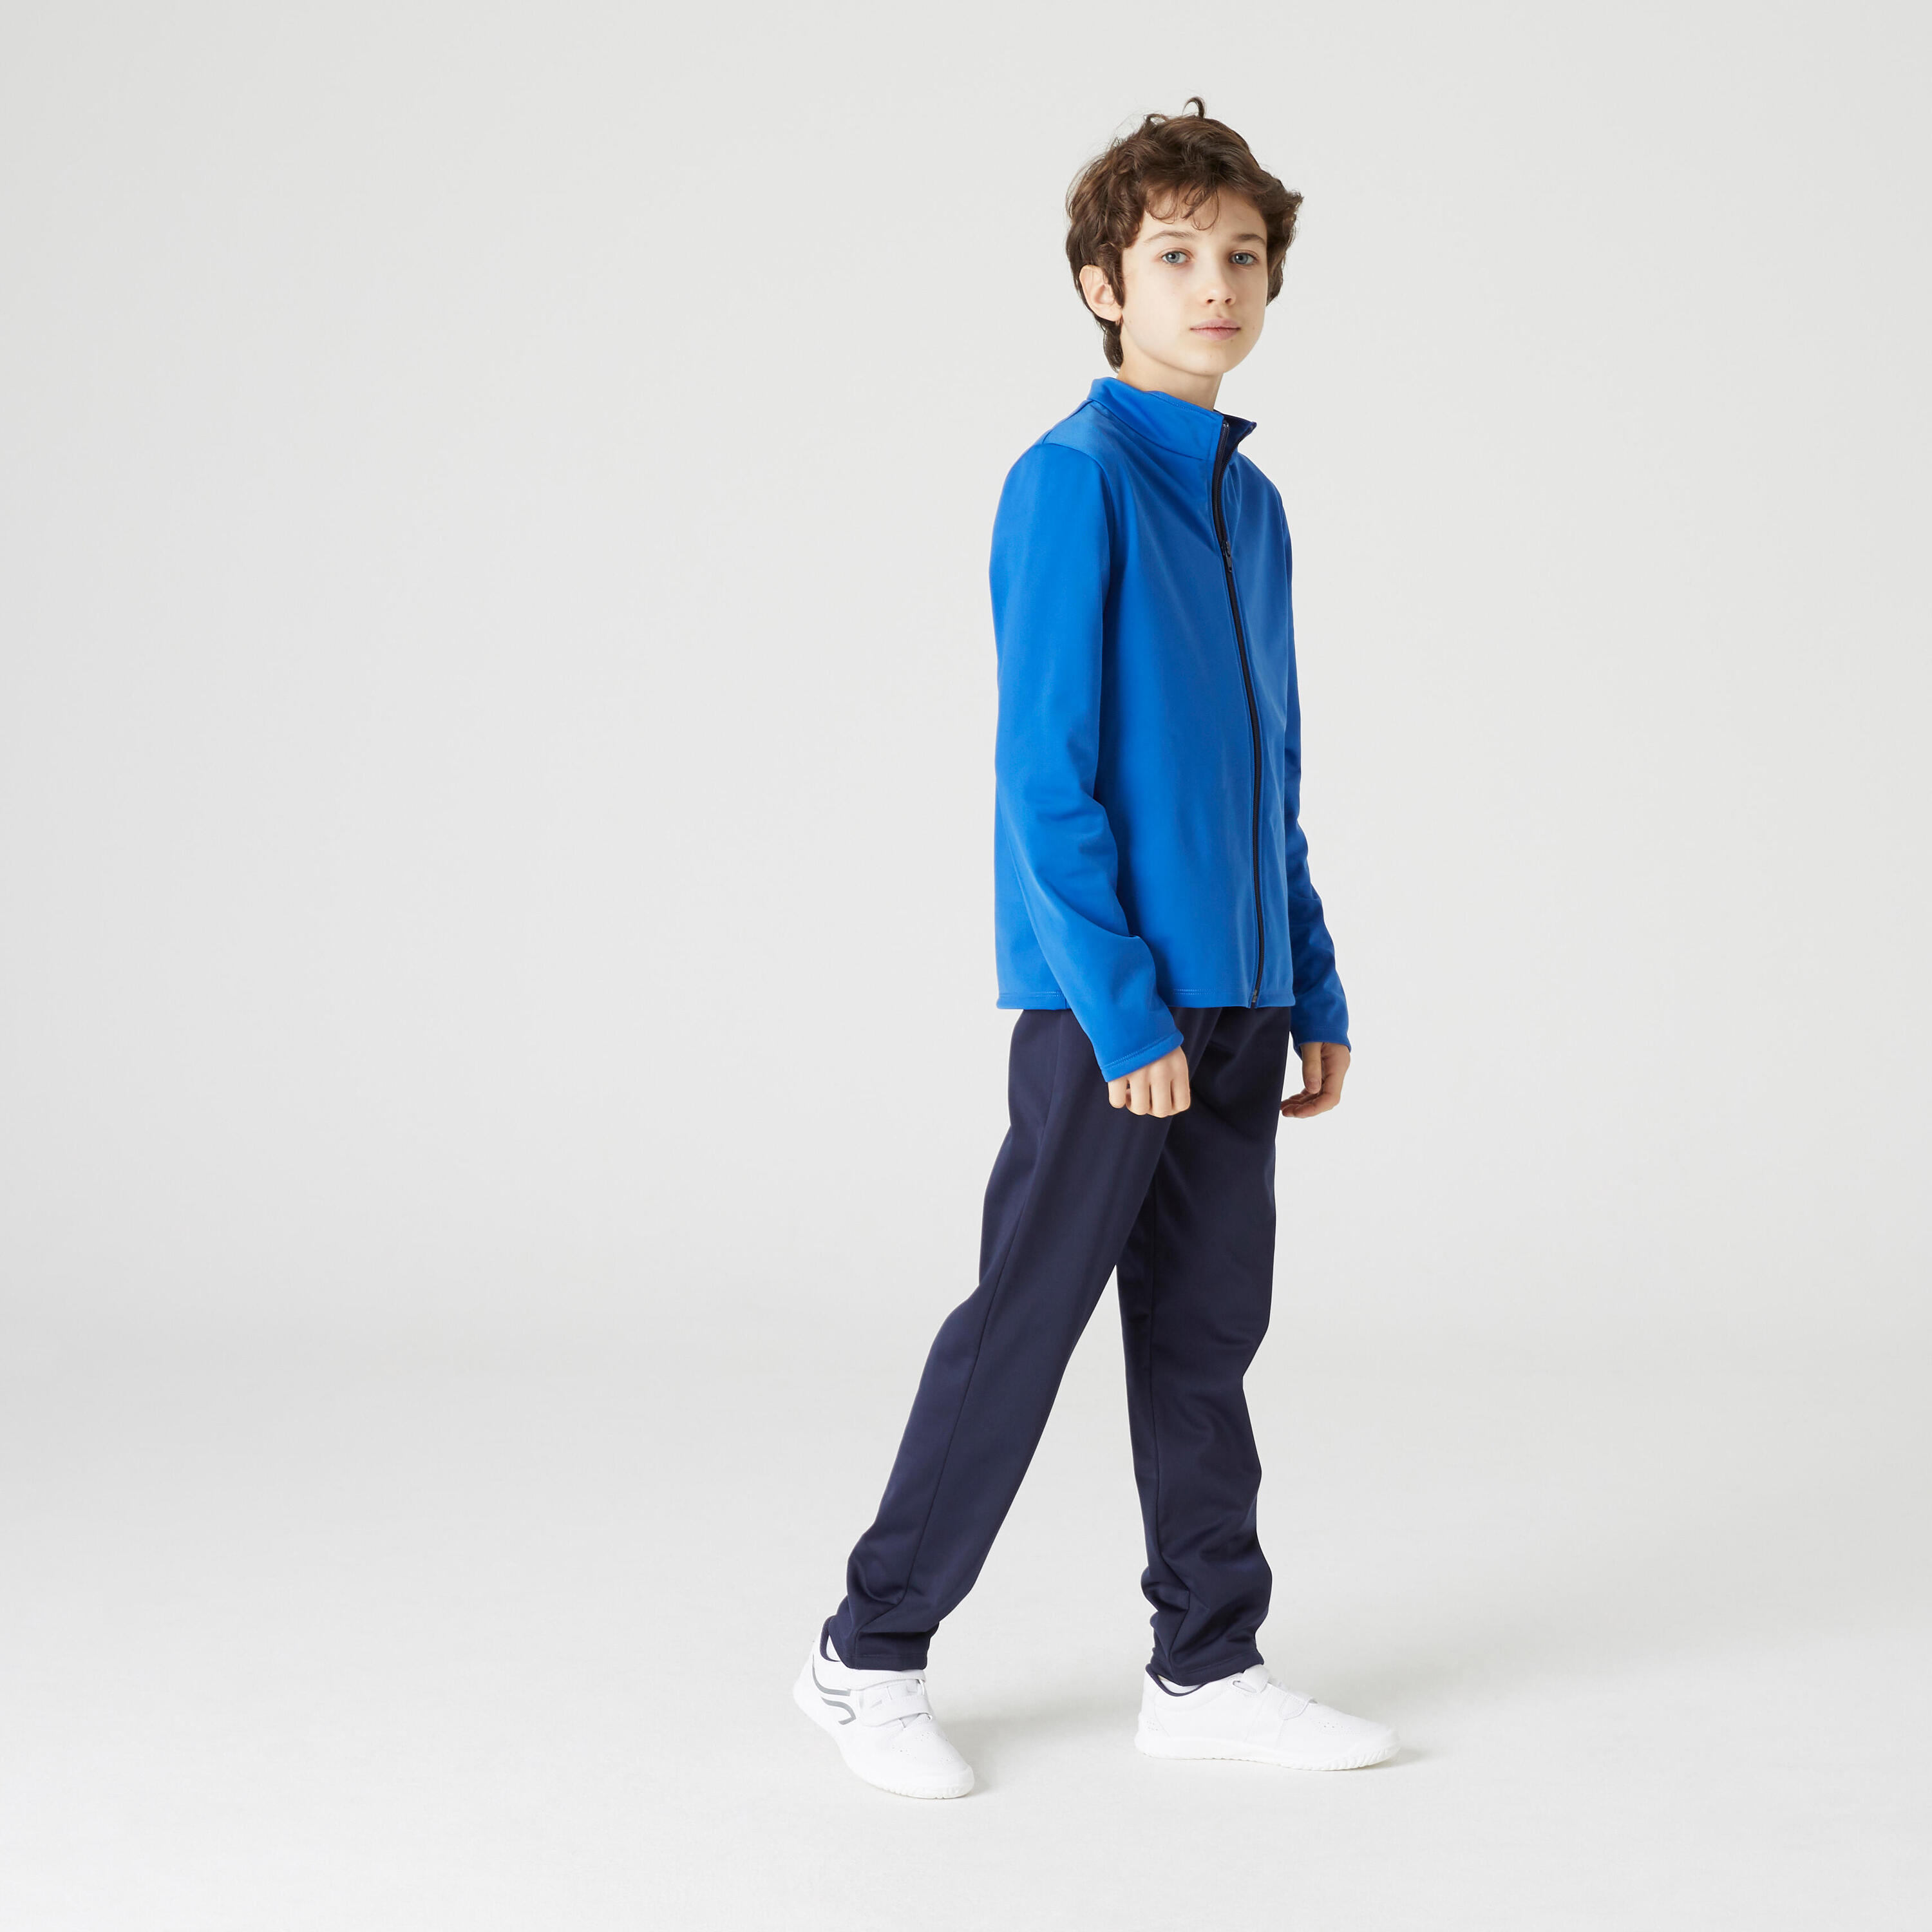 DOMYOS Kids' Synthetic Breathable Tracksuit Gym'Y - Blue/Navy Bottoms